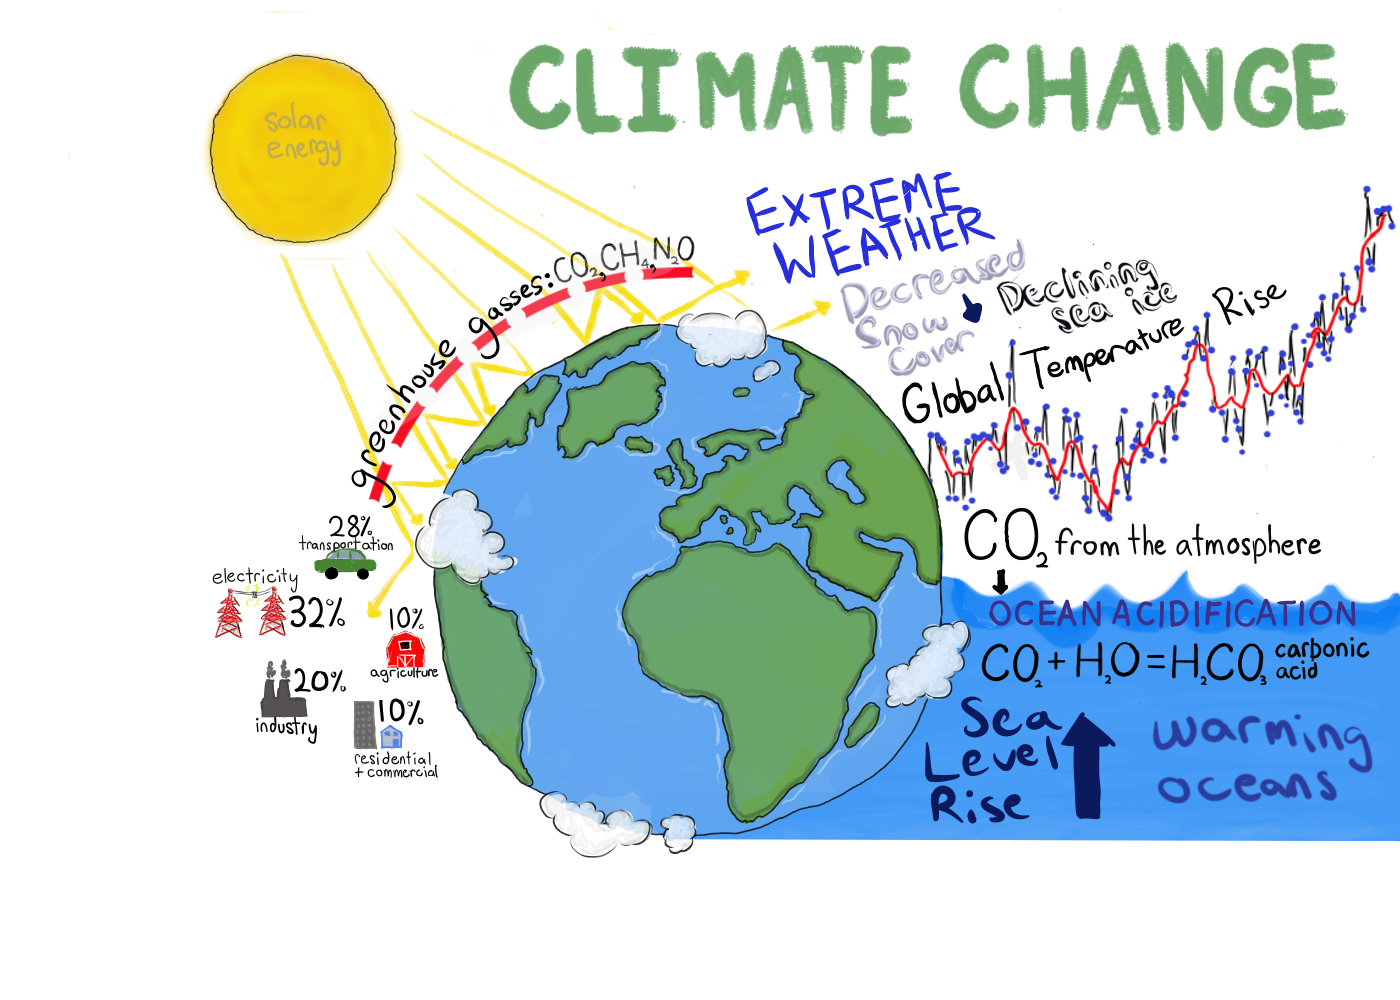 Climate Change has both environmental and economic impacts.